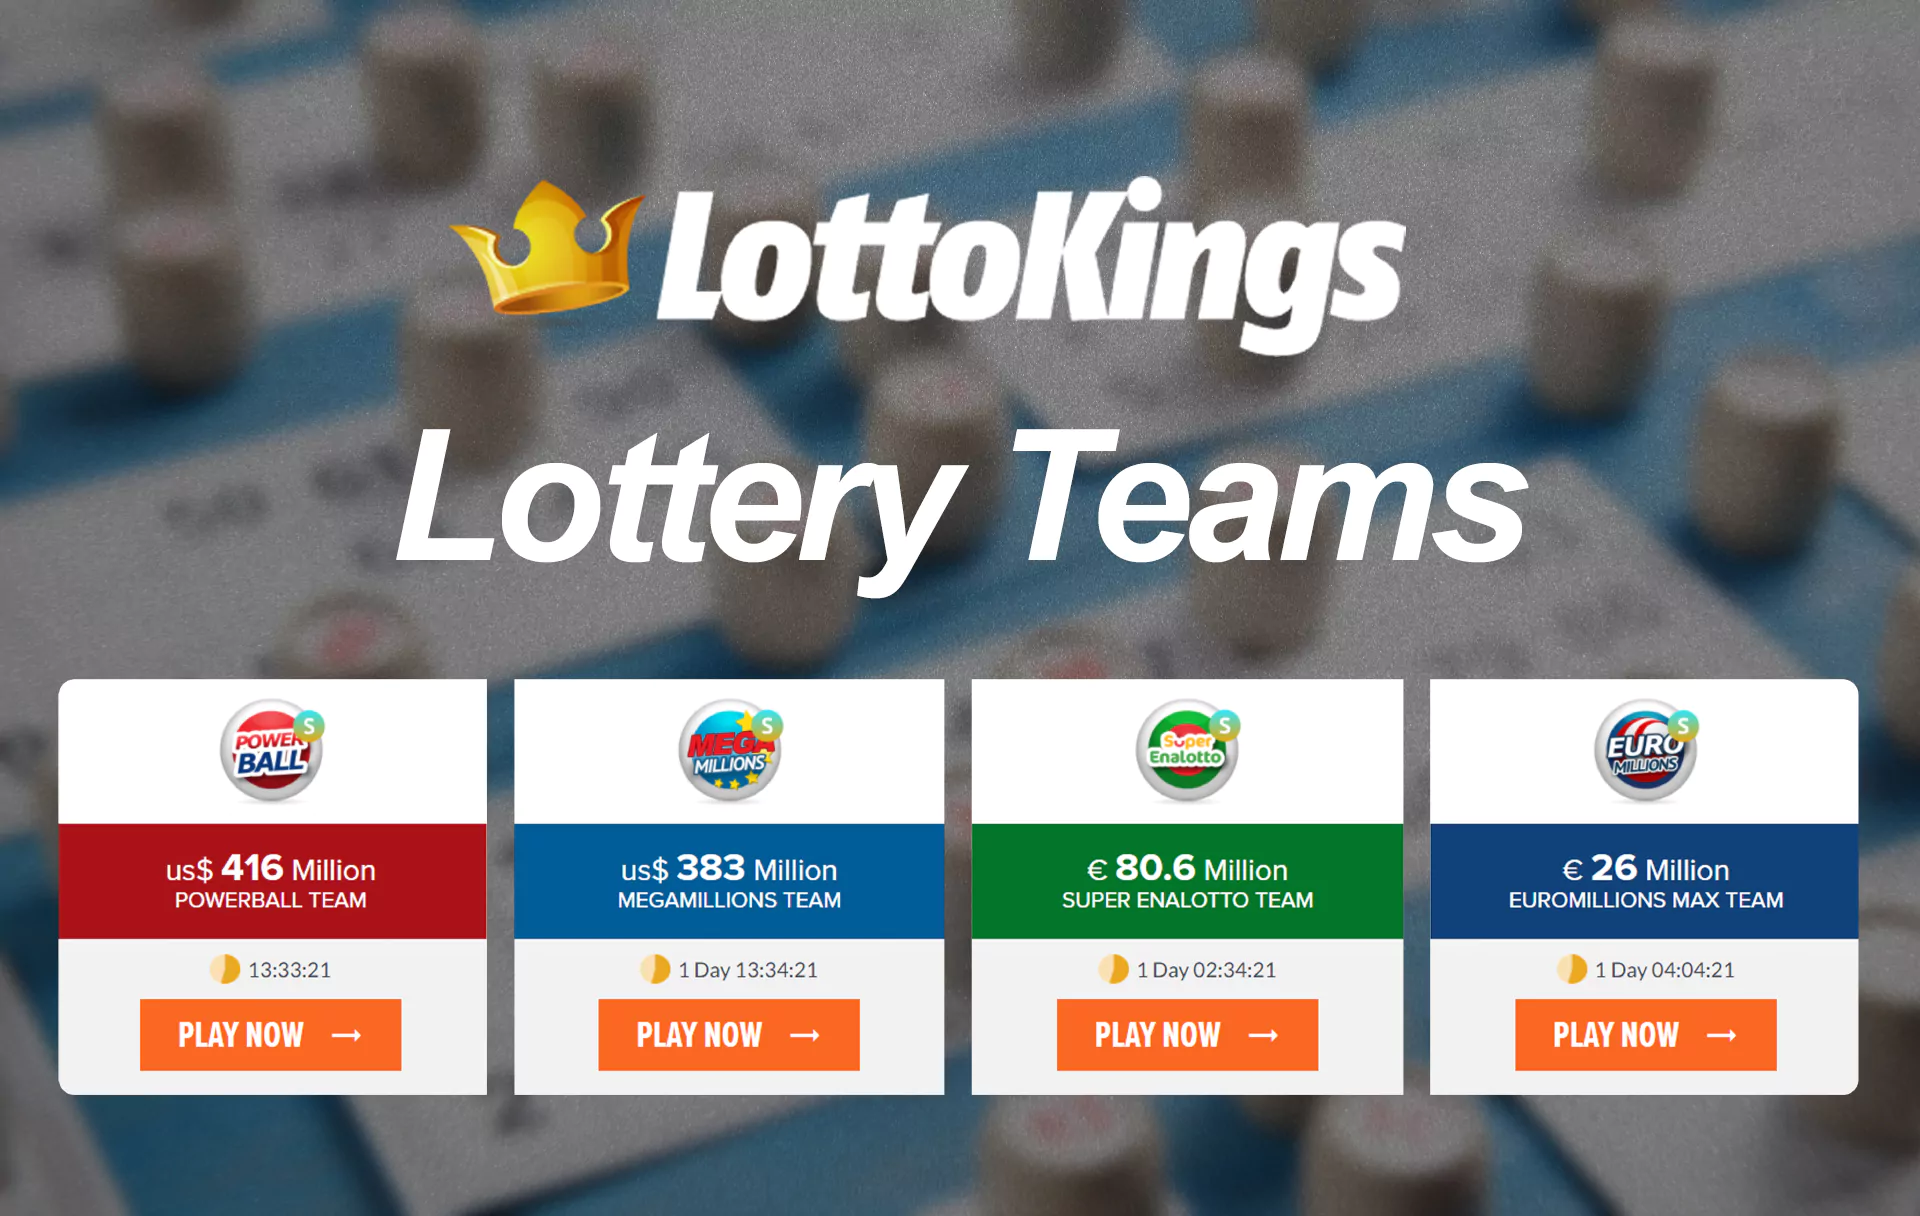 You can join one of the lottery teams to increases the chances of winning.